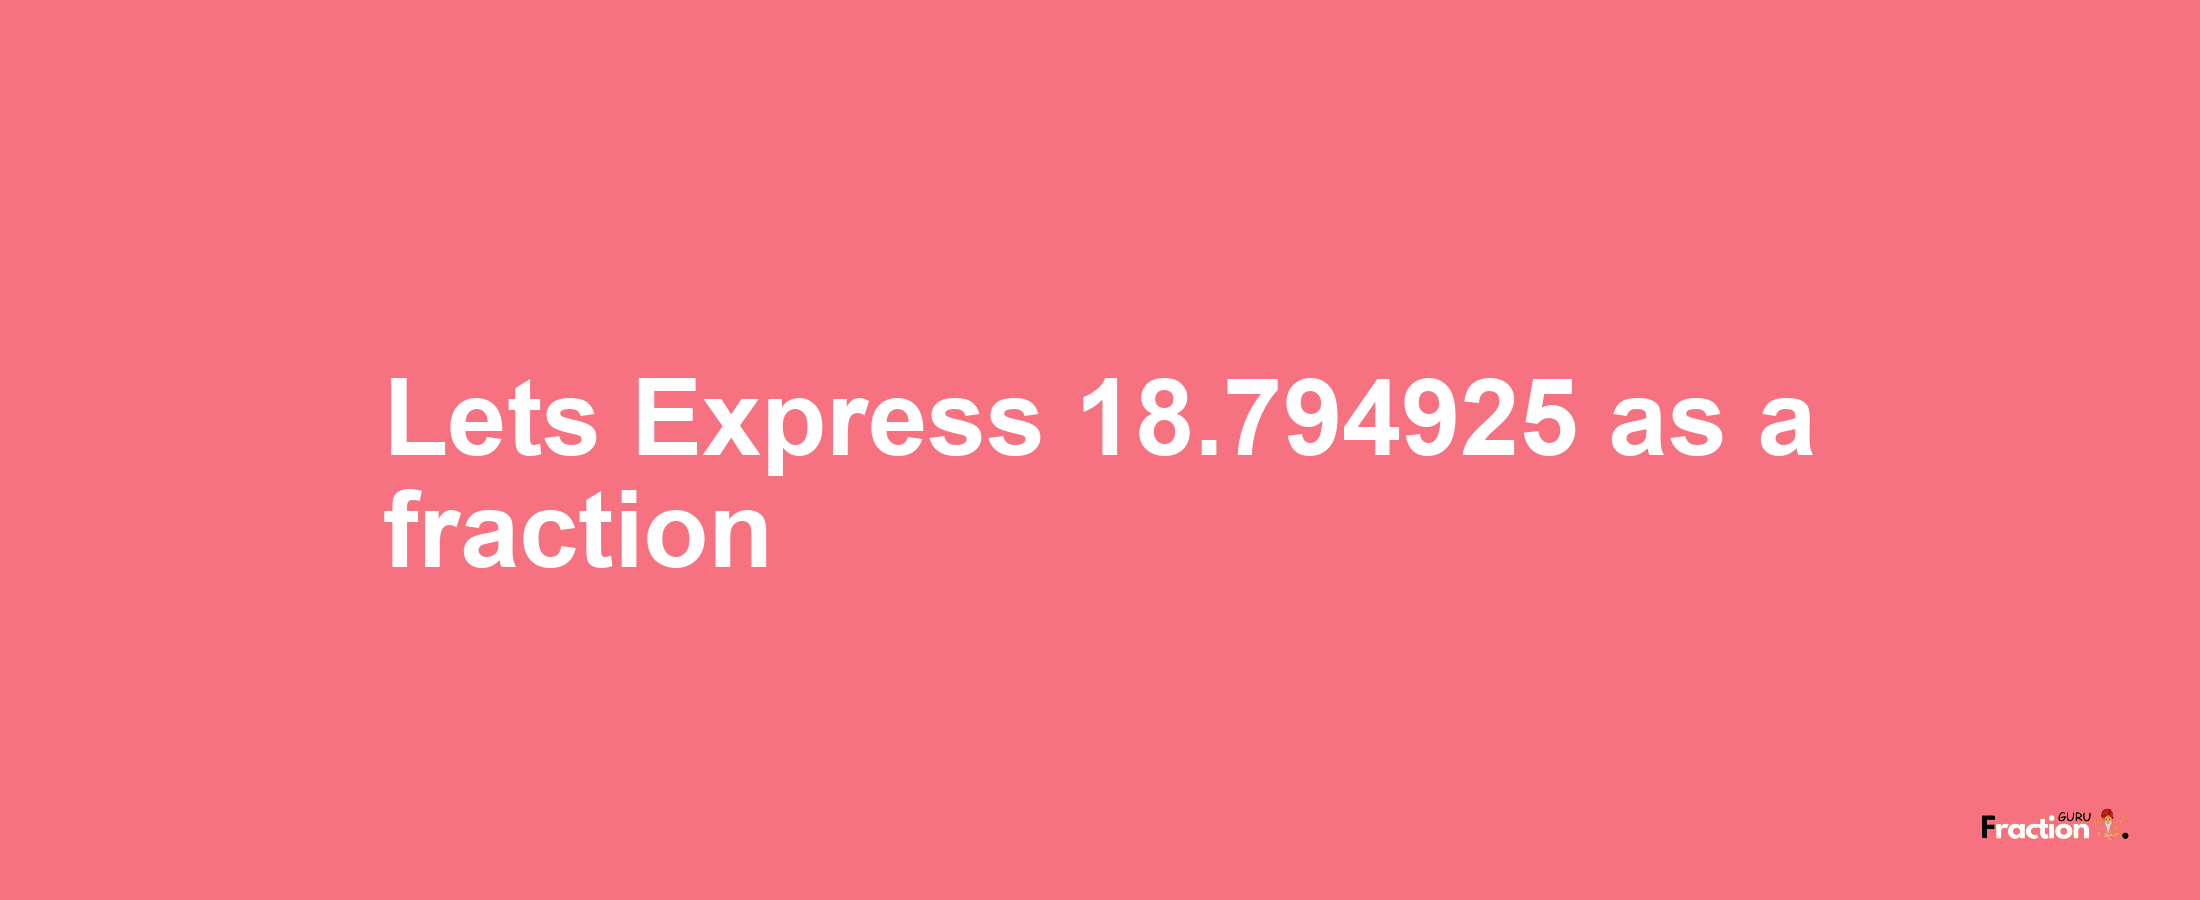 Lets Express 18.794925 as afraction